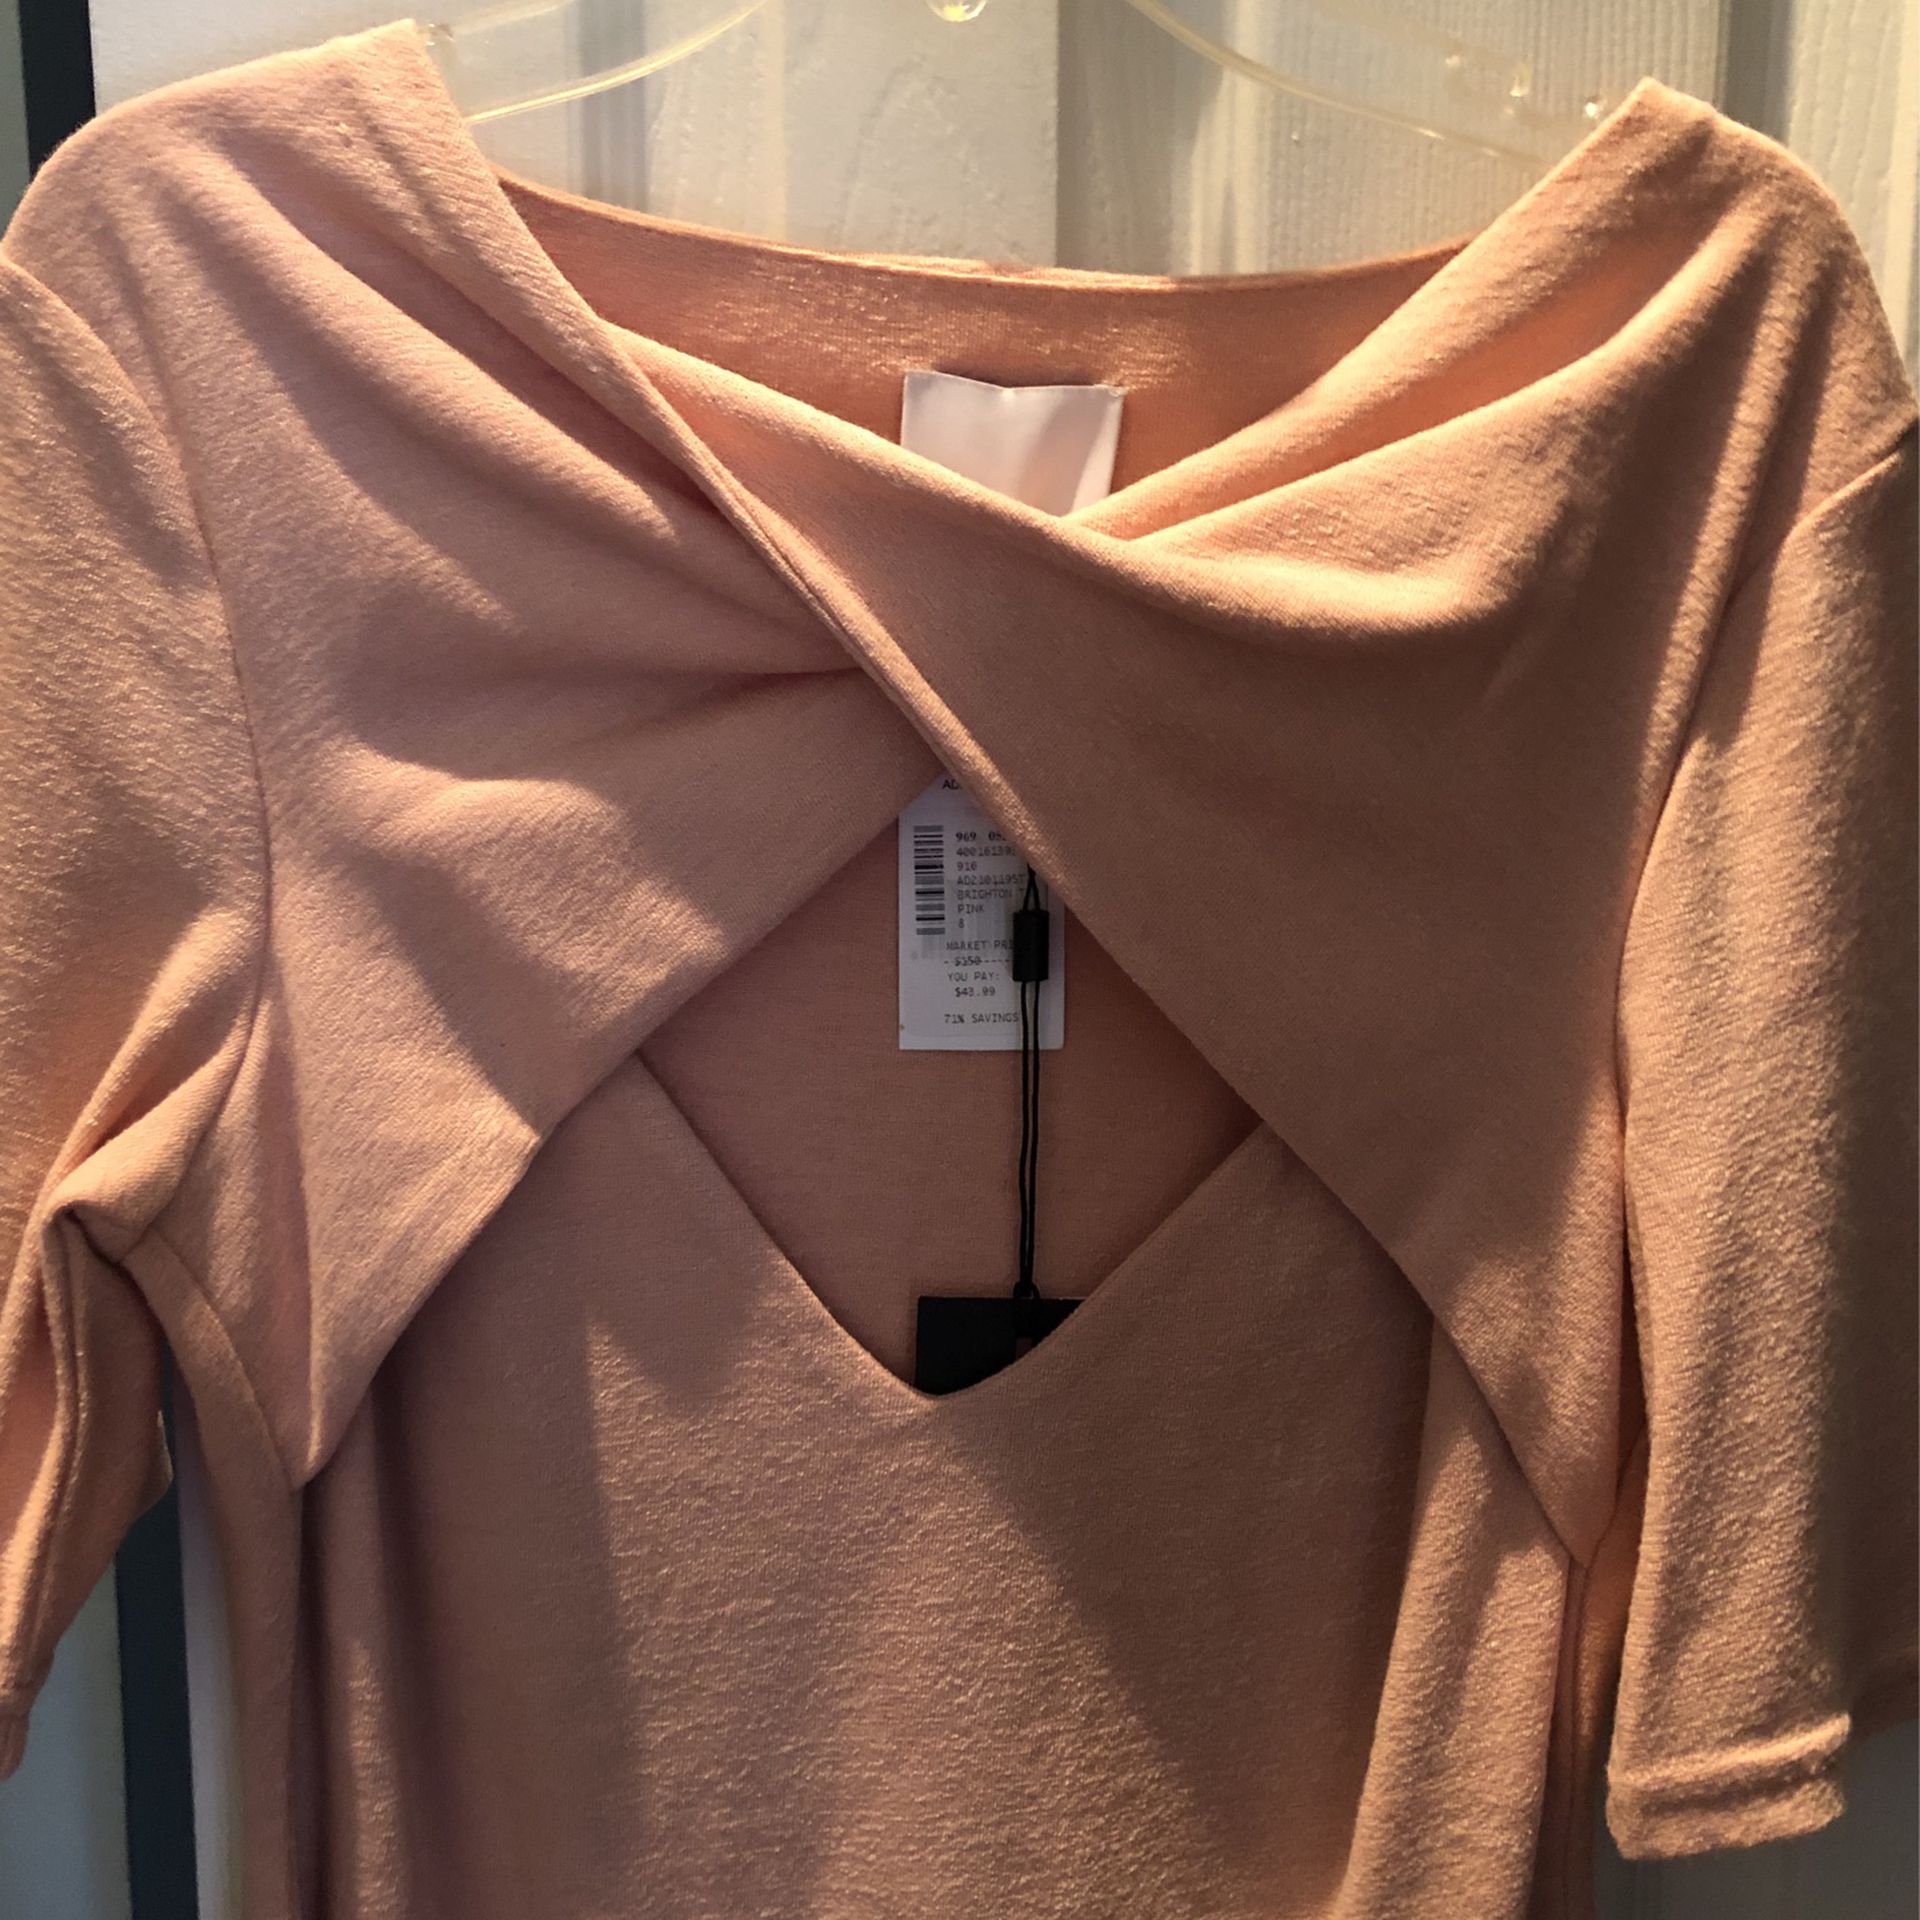 Acler Top.size https://offerup.com/redirect/?o=OC5OZXc= Wtag